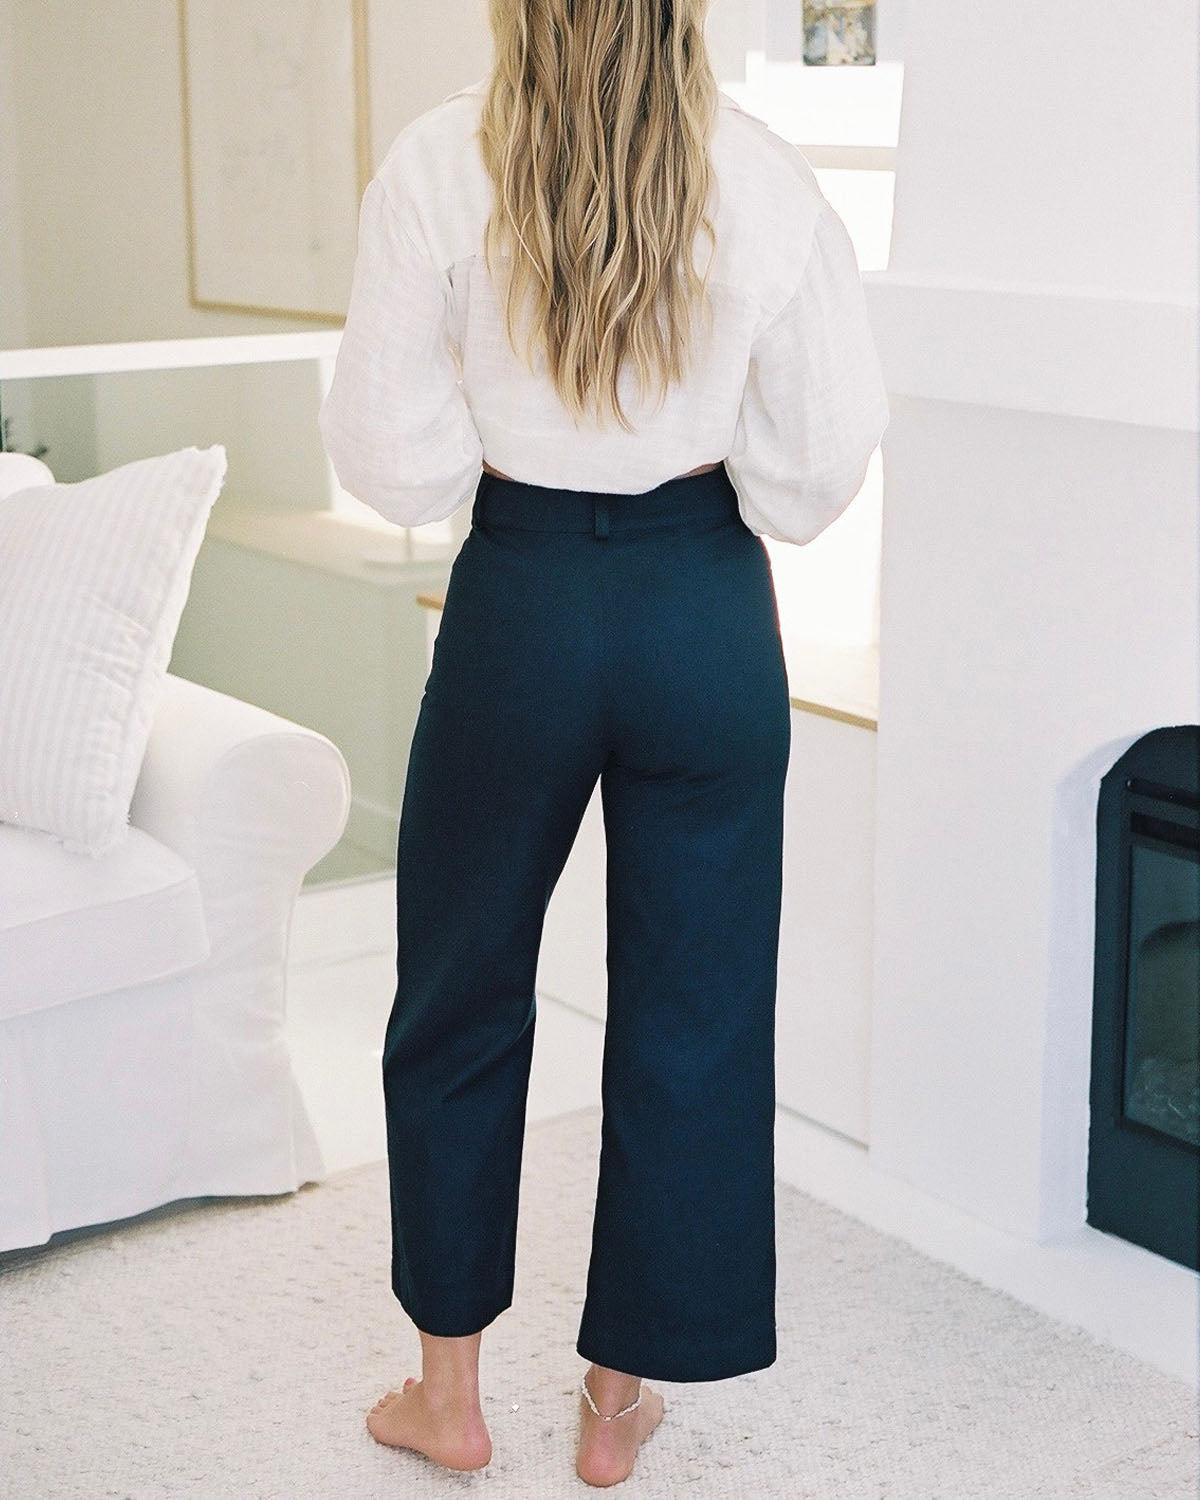 The Pierrot Pants are our modern day, eco-friendly take on the iconic sailor pant. This high rise, wide leg crop classic is made with hemp and organic cotton and is the sustainable essential of our dreams. Handmade with a hemp and organic cotton blend in Vancouver, BC.